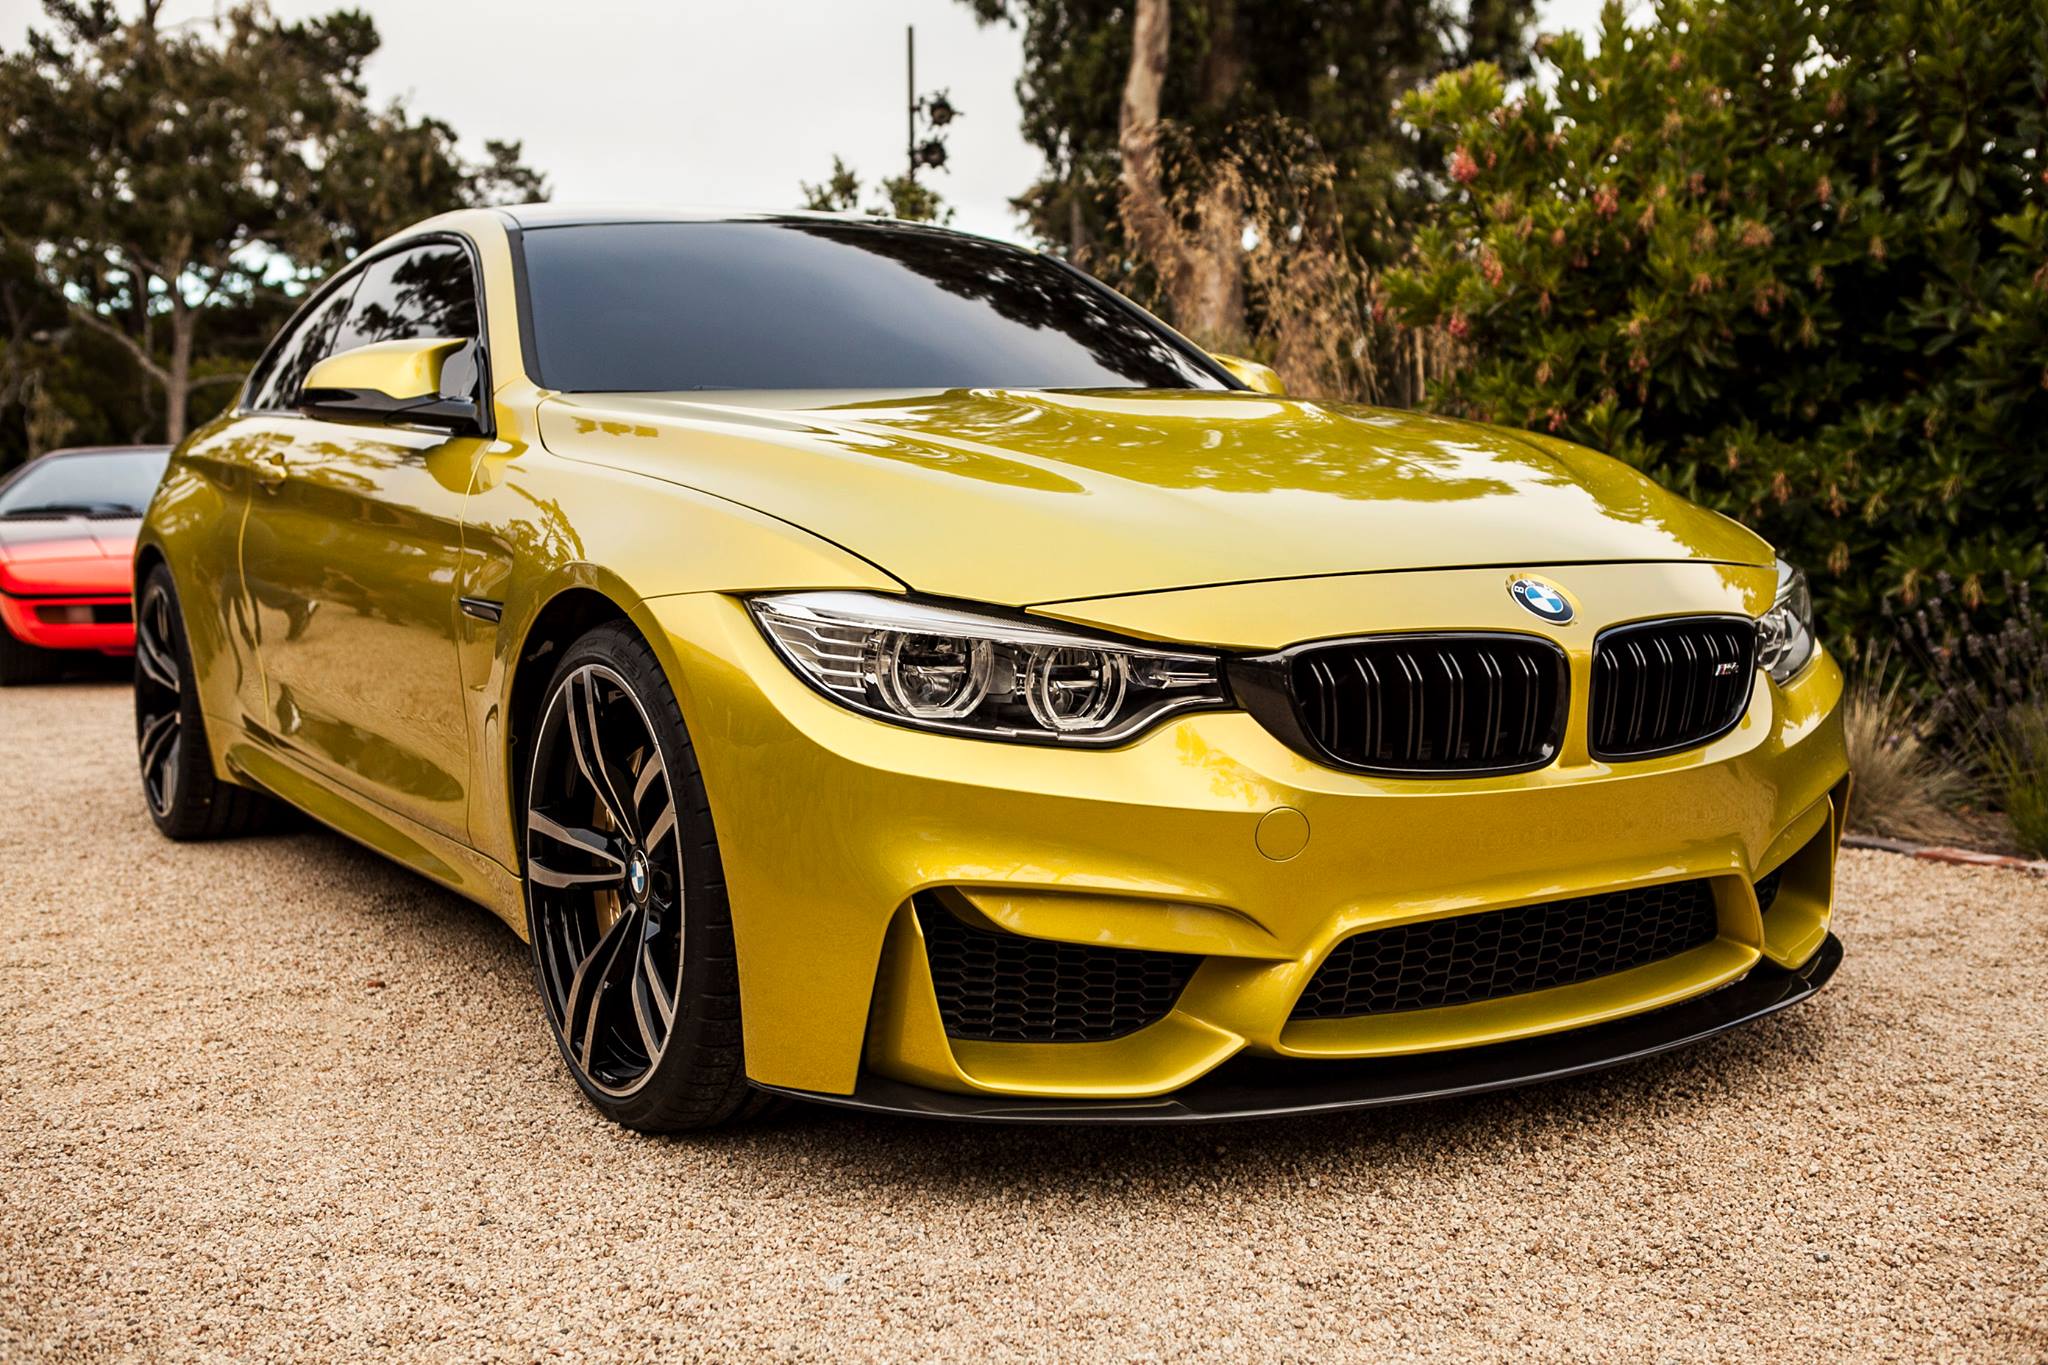 BMW M4 Coupe Concept Appears at Pebble Beach – First Live Photos